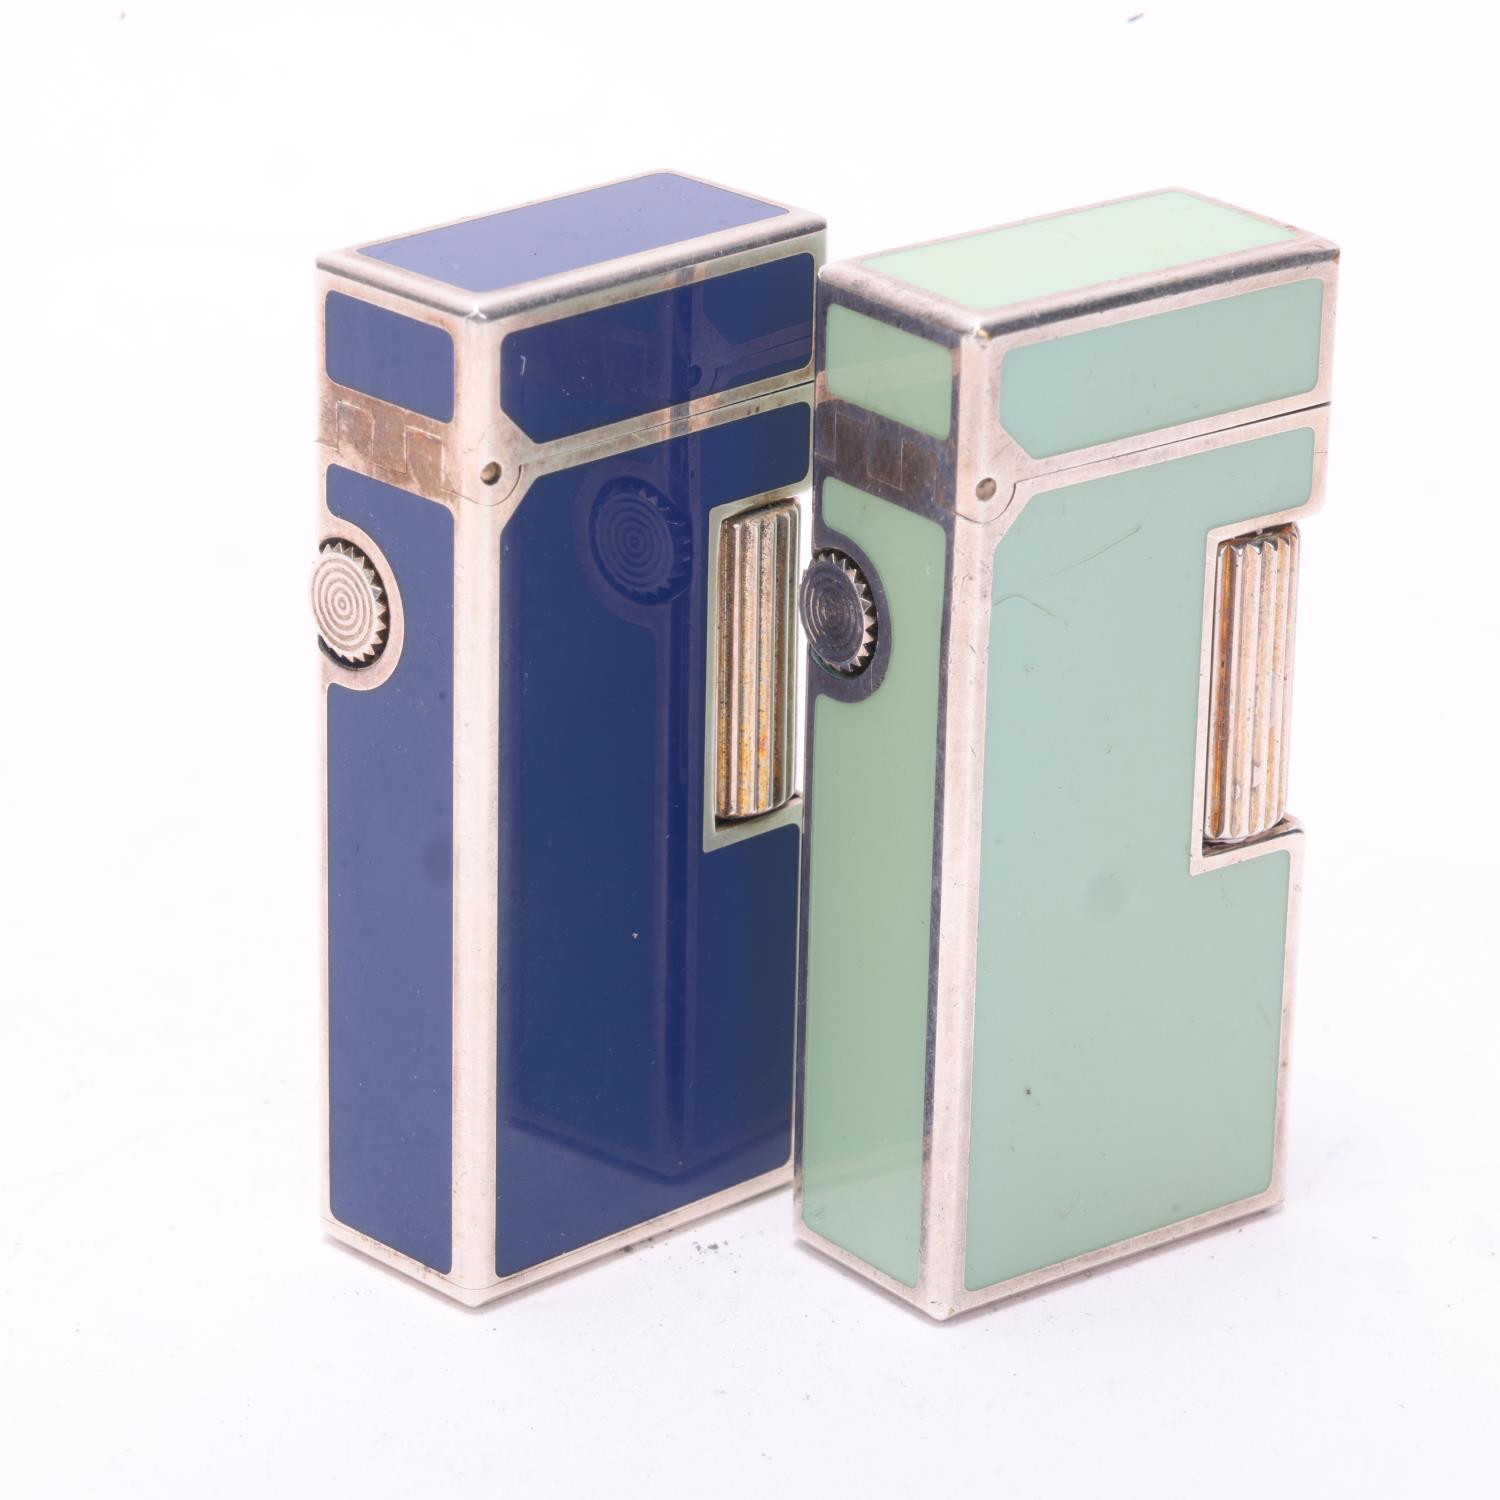 2 vintage Dunhill Rollagas lighters, with blue and aqua lacquer bodies, makers marks to base, No - Image 4 of 4